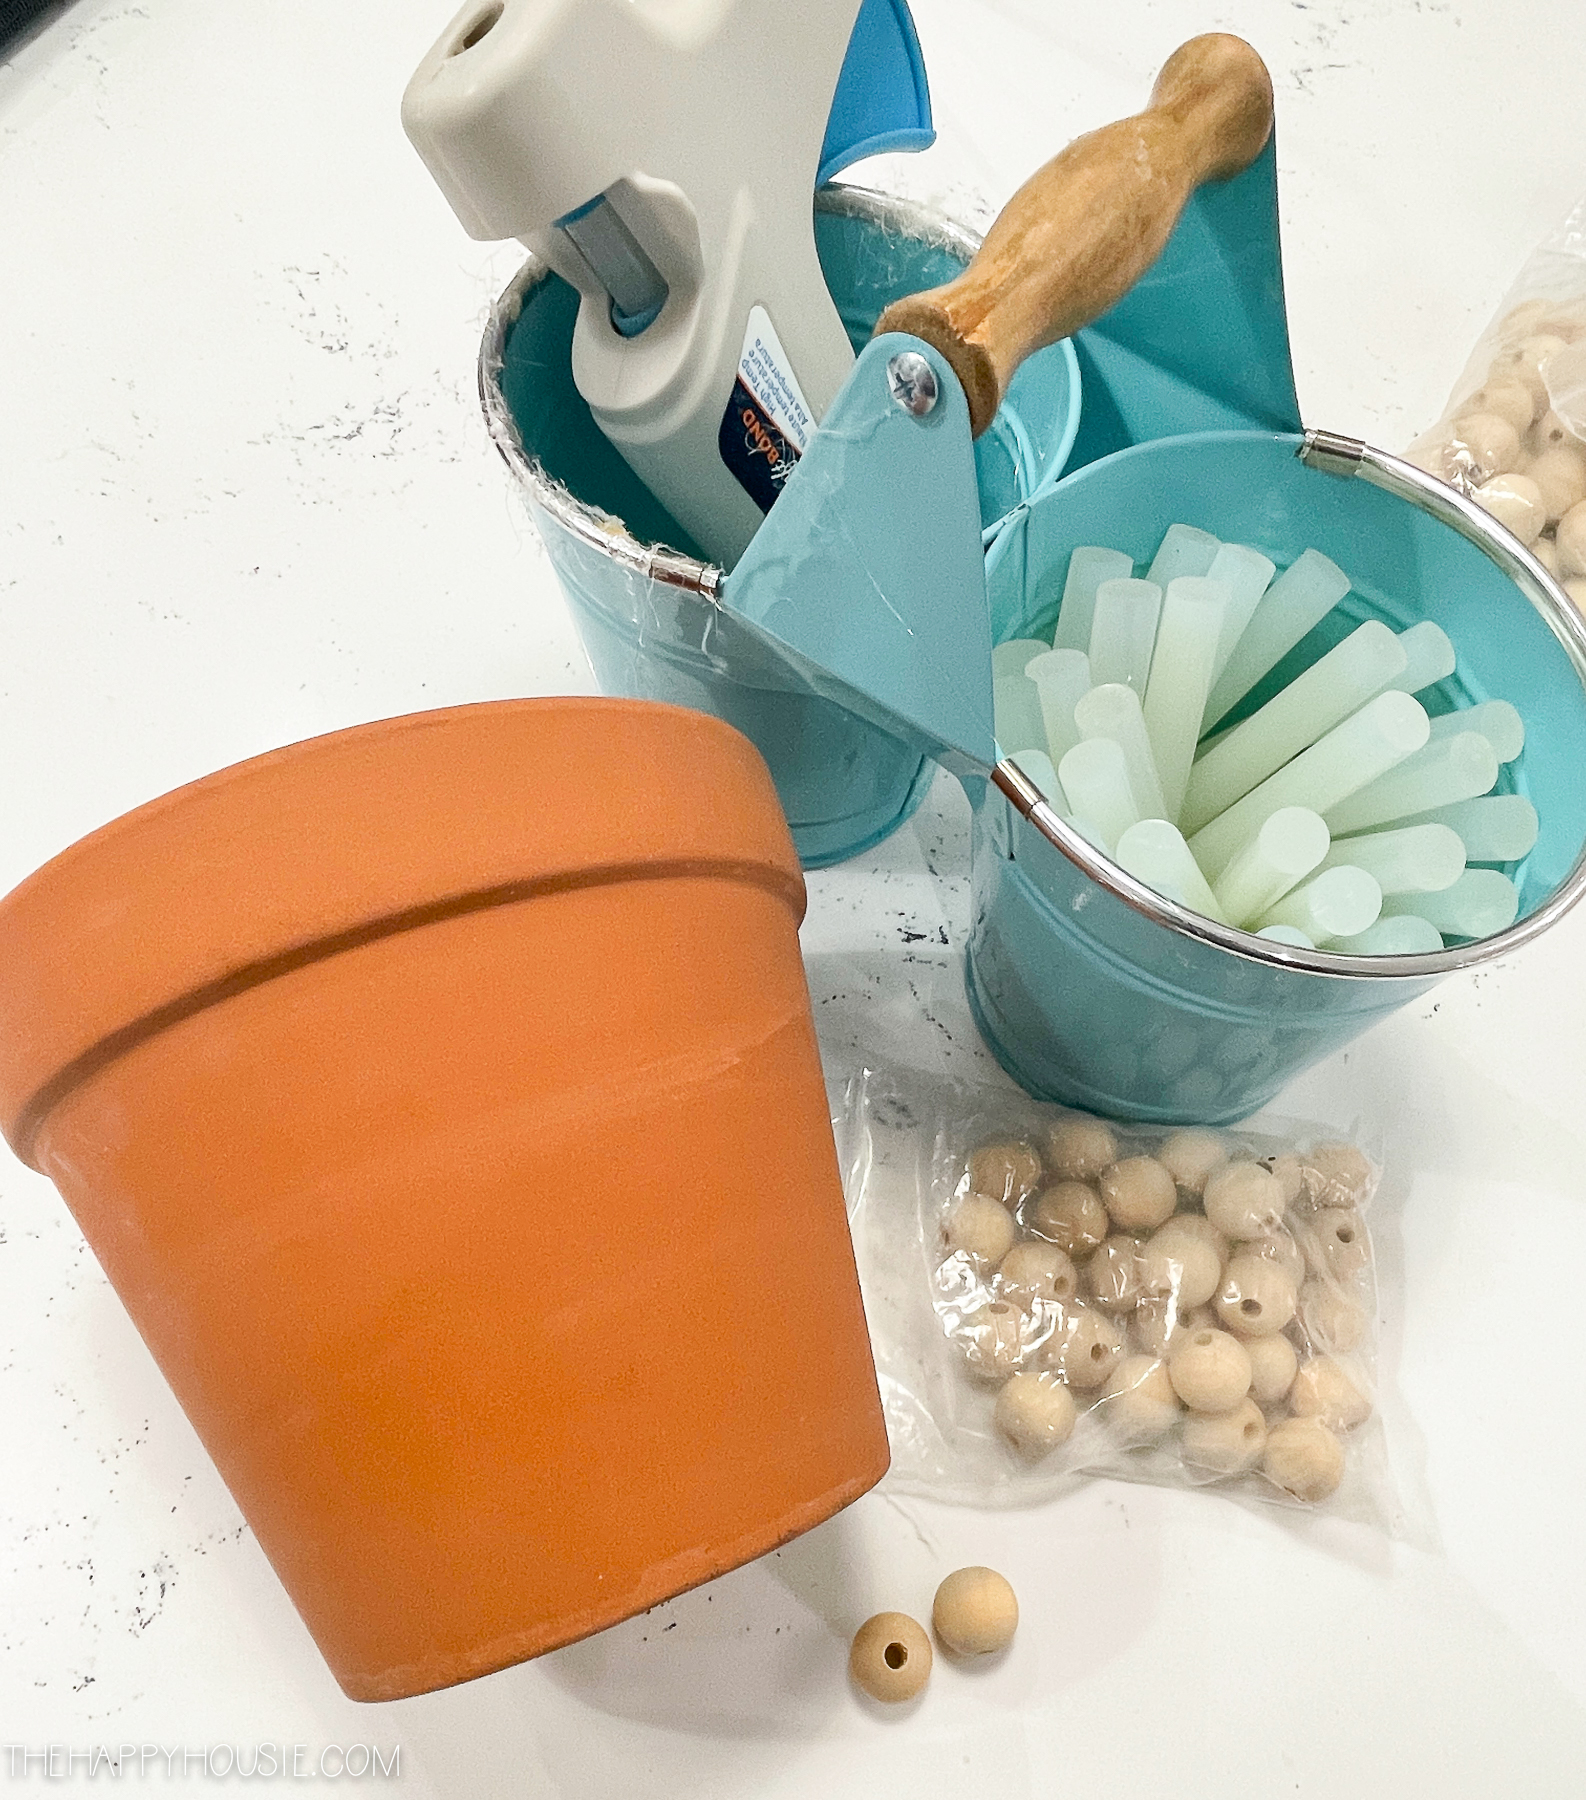 A container for a potted plant, Glue gun and glue sticks.